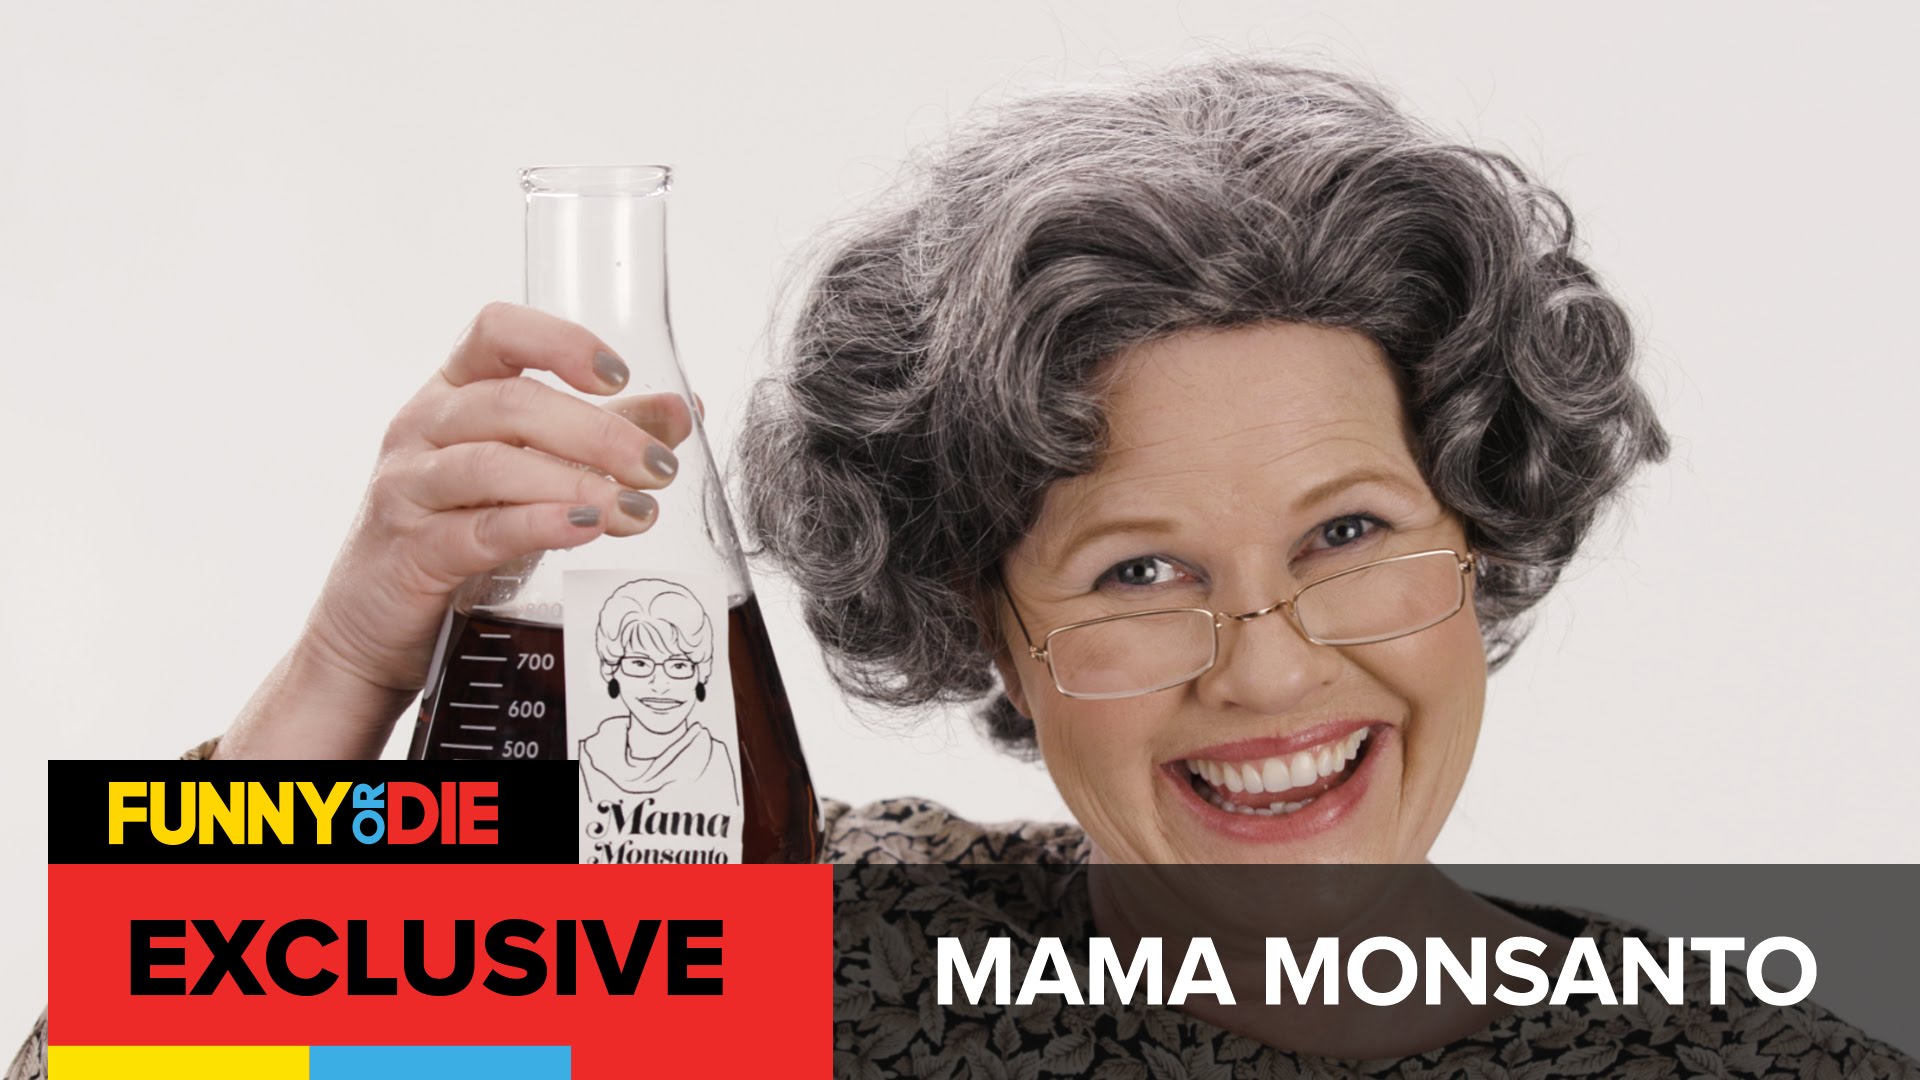 Funny or Die Does Great Video About “Mama Monsanto”!